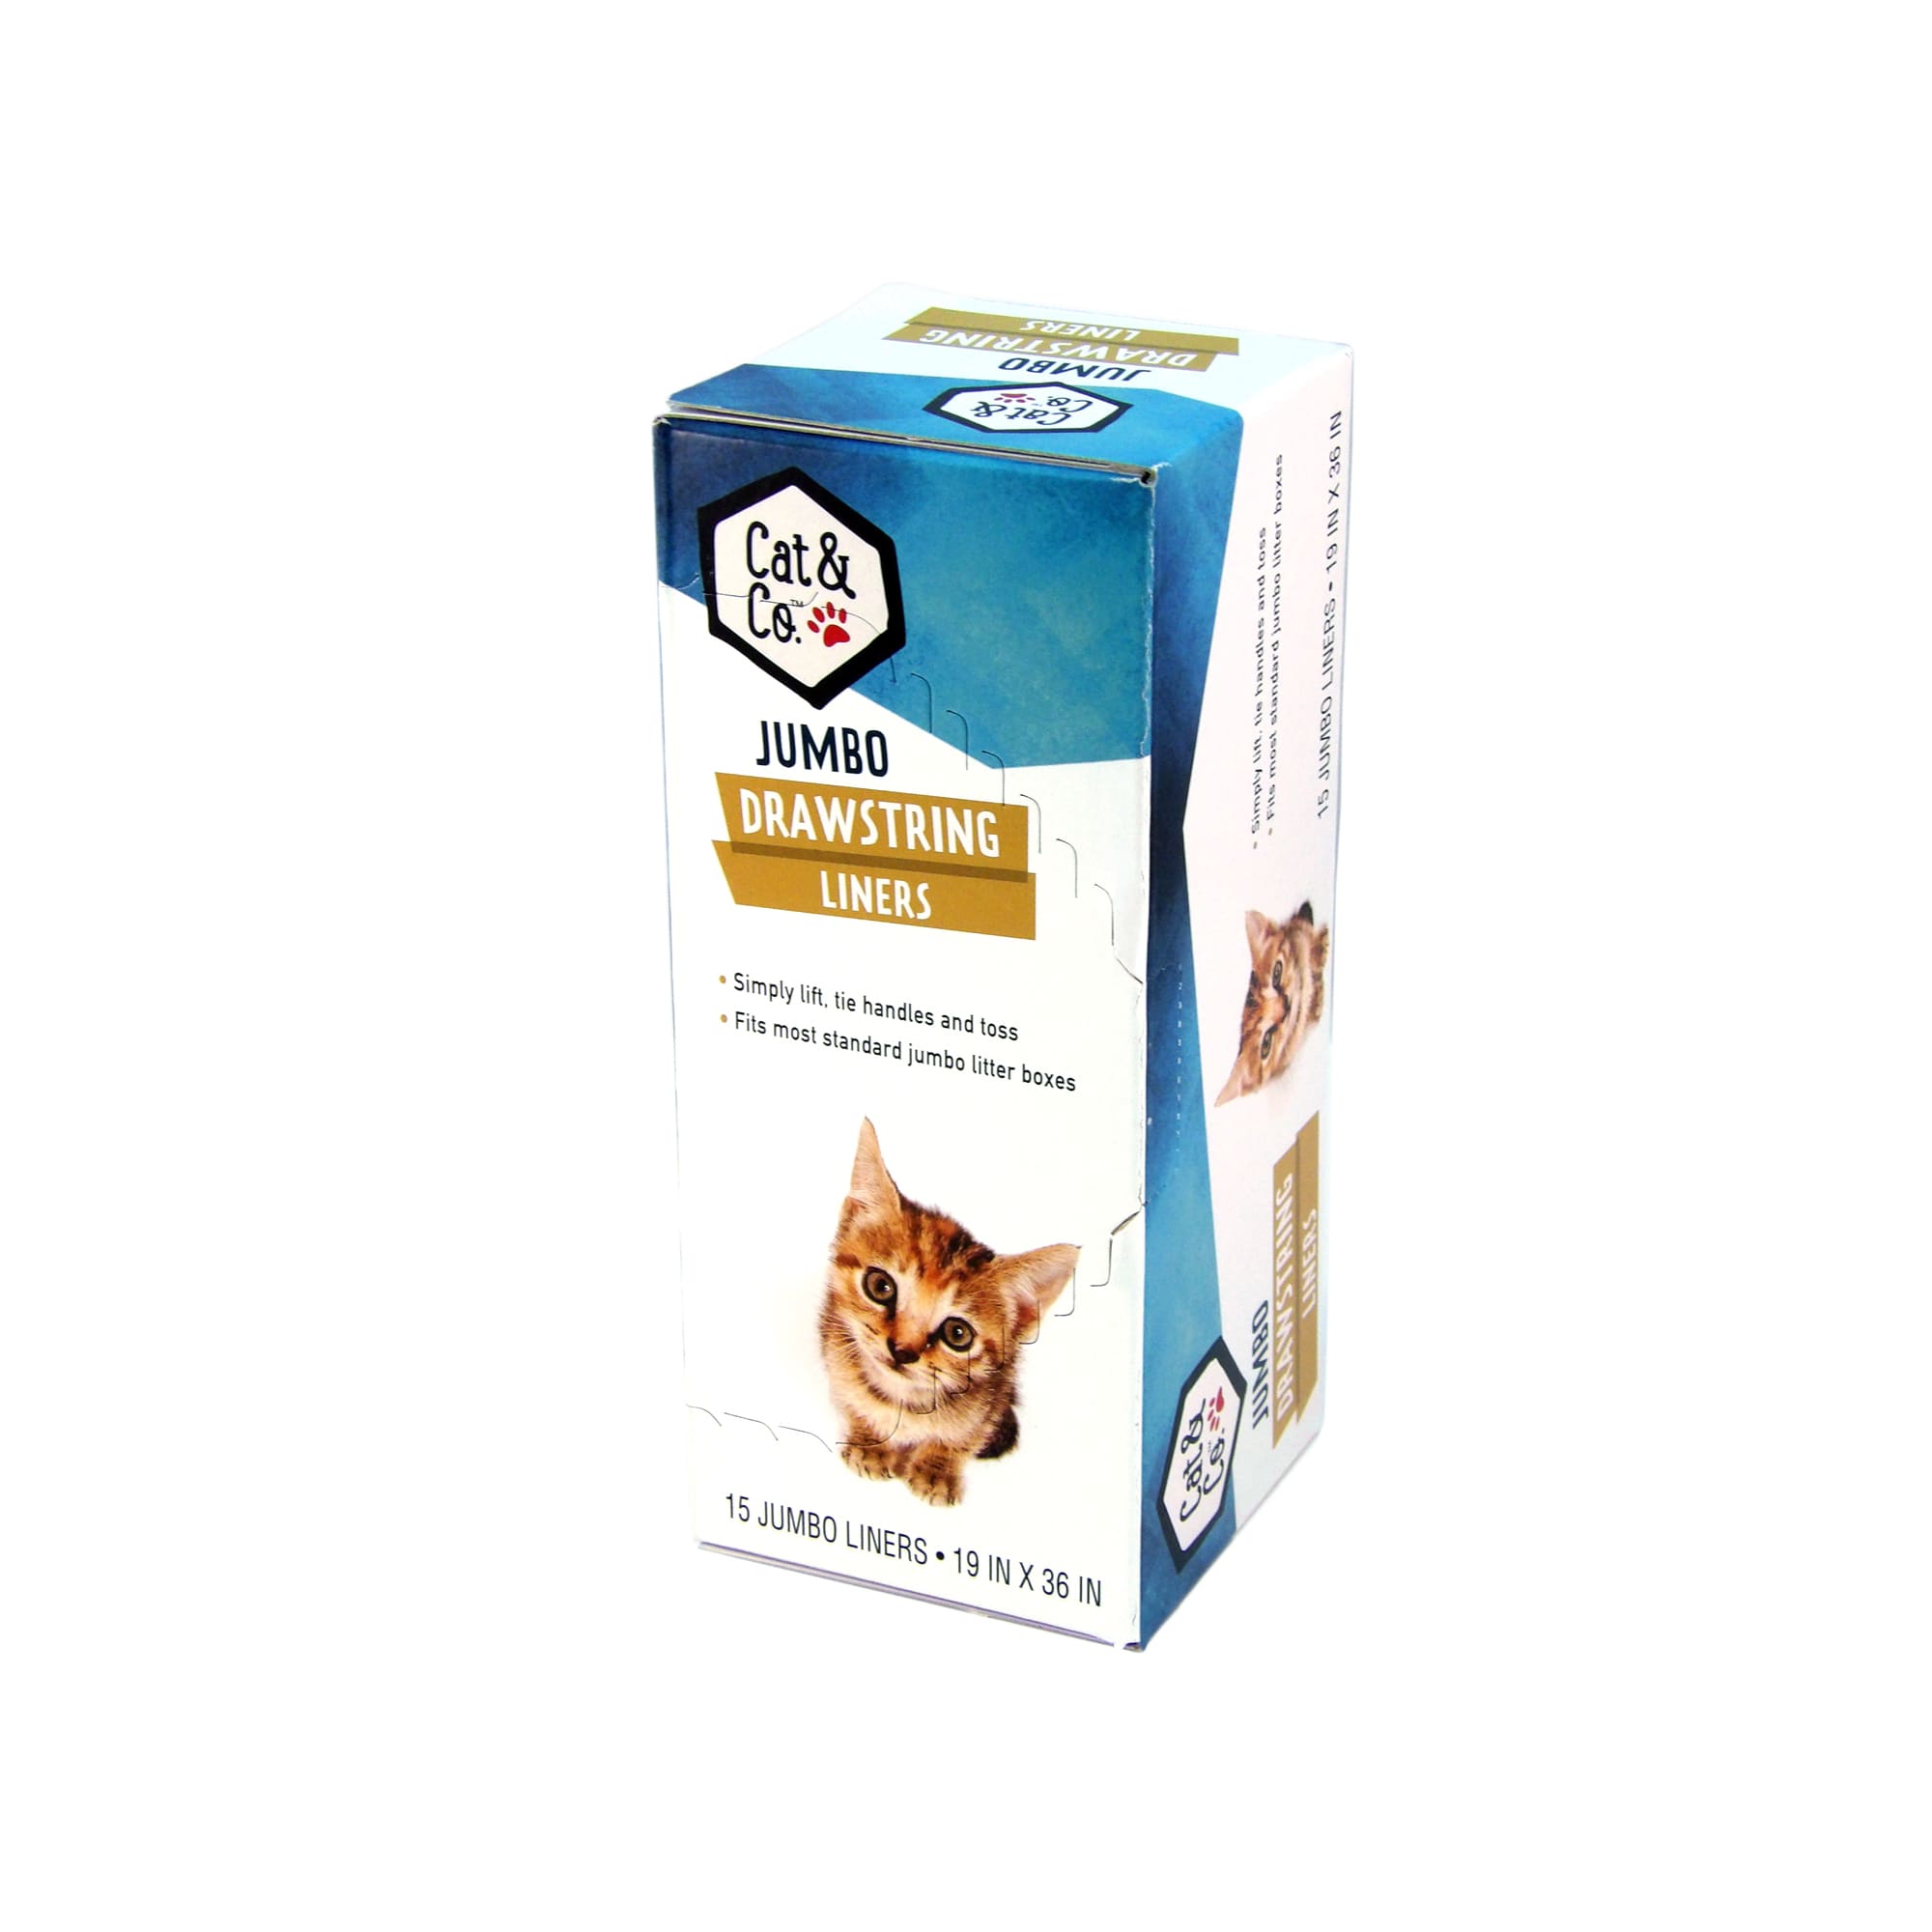 Cat Litter Box Liners with Drawstring Bag Heavy Duty Jumbo Super Strong and Thick Cat Litter Liners for Cats-1 Pack×5 Litters、2 Pack×5 Liners、3 Pack×5 Liners、6 Pack×5 Liners for Choice 